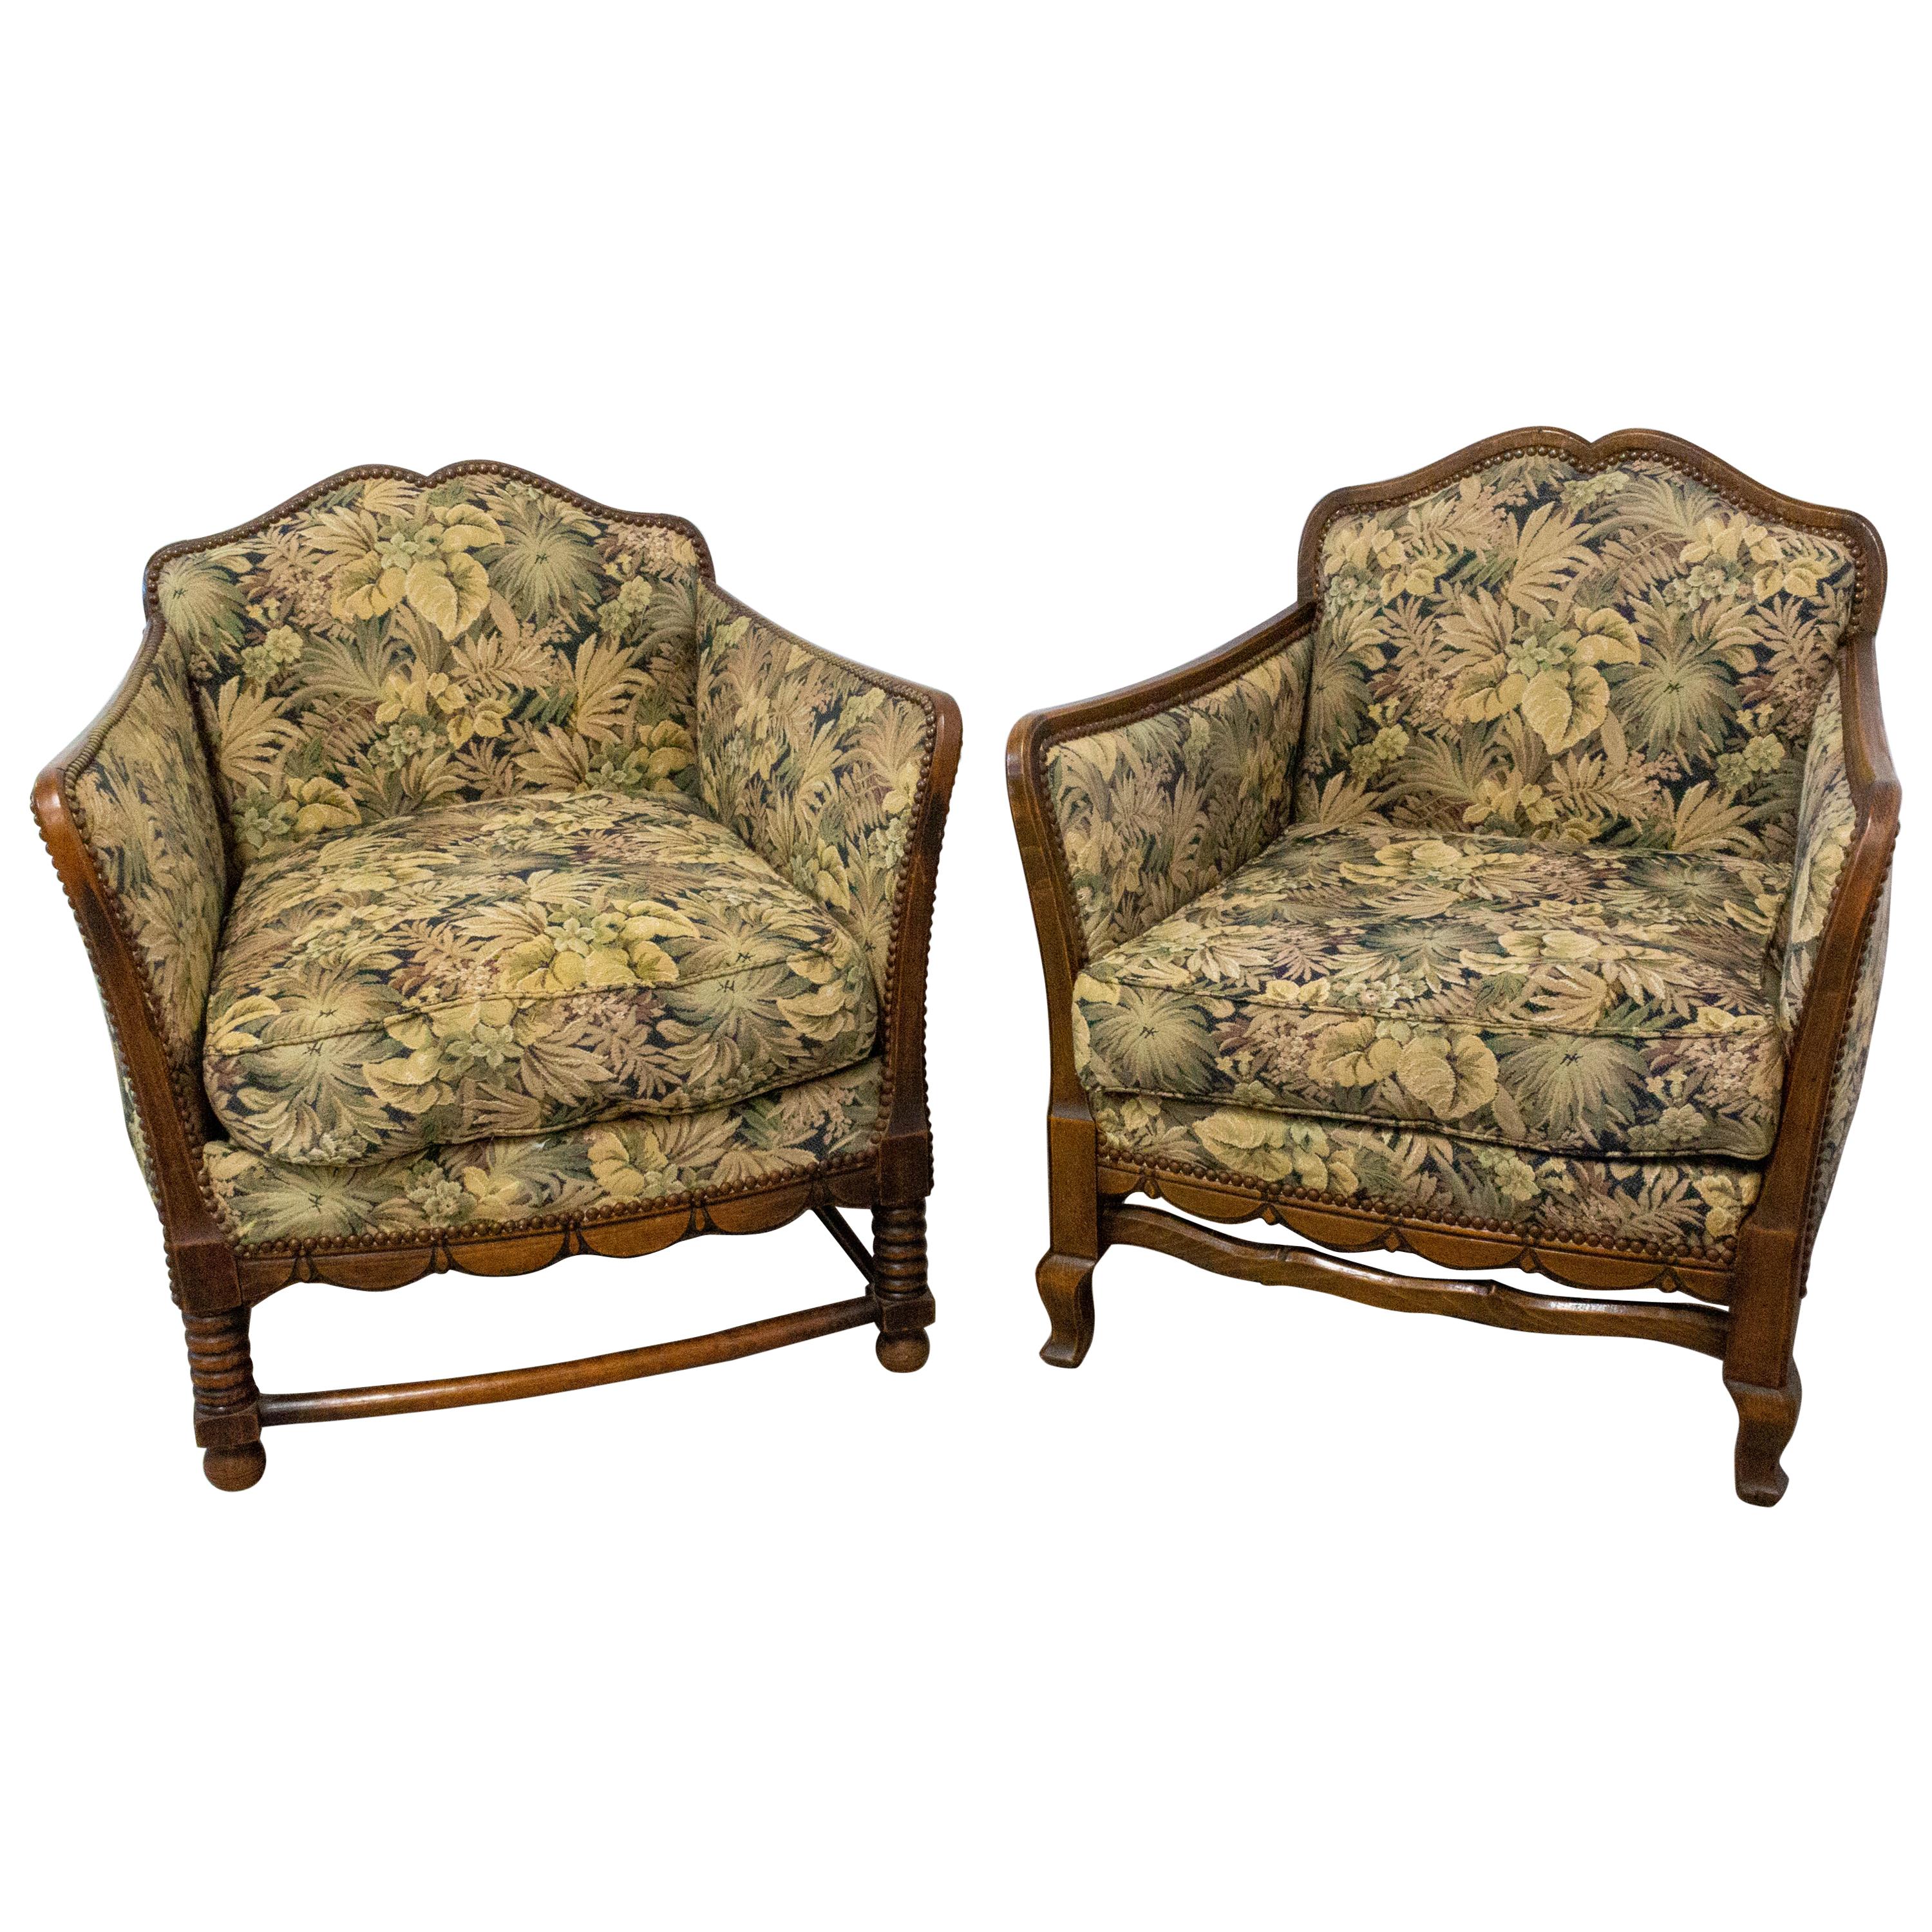 Pair of Beech Armchairs French, to Be Re-Upholstered Early 20th Century